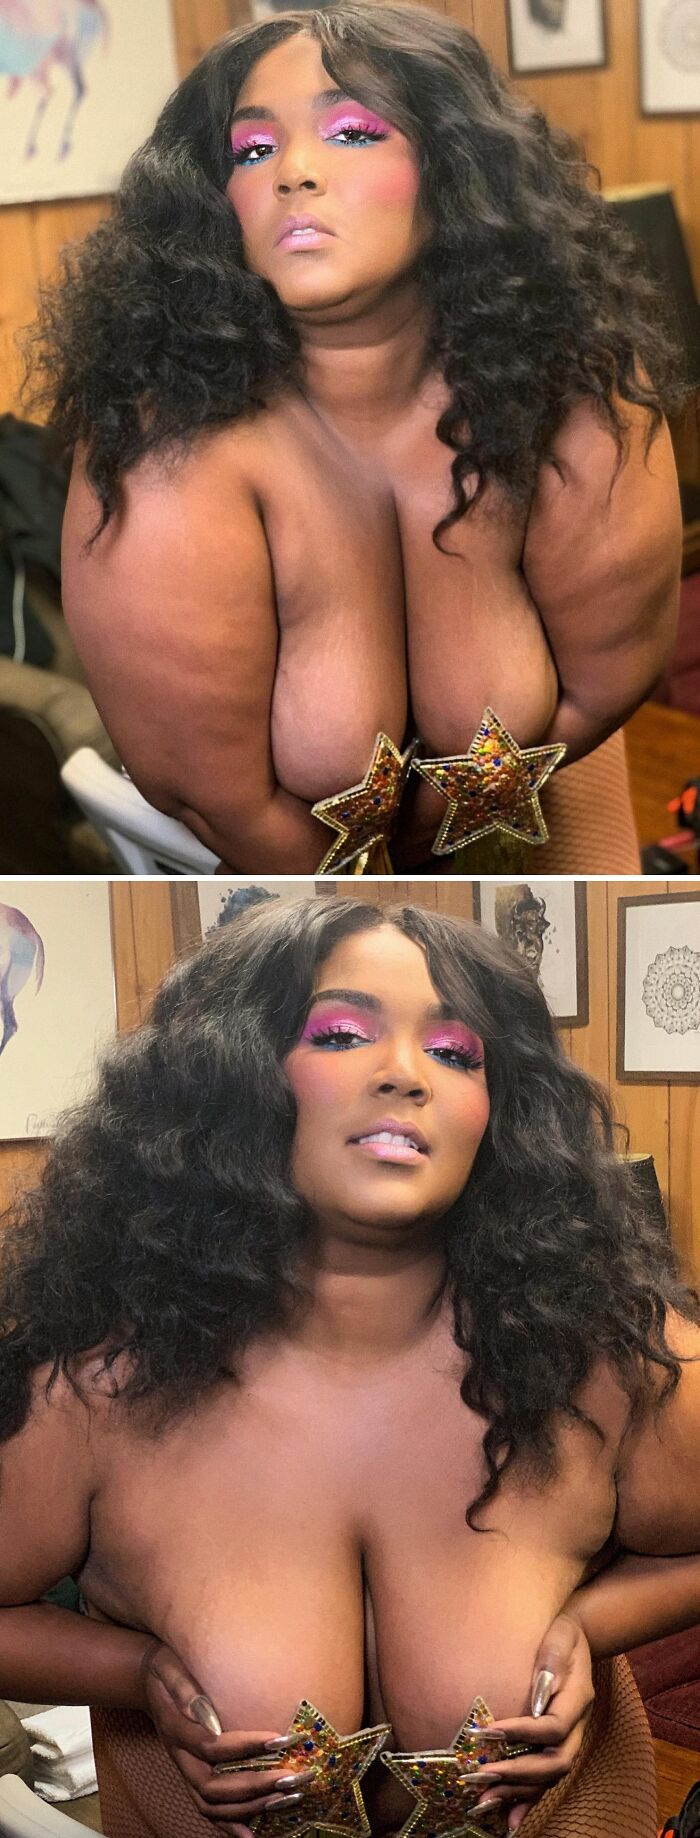 When Lizzo Shared This Topless Photo Of Herself